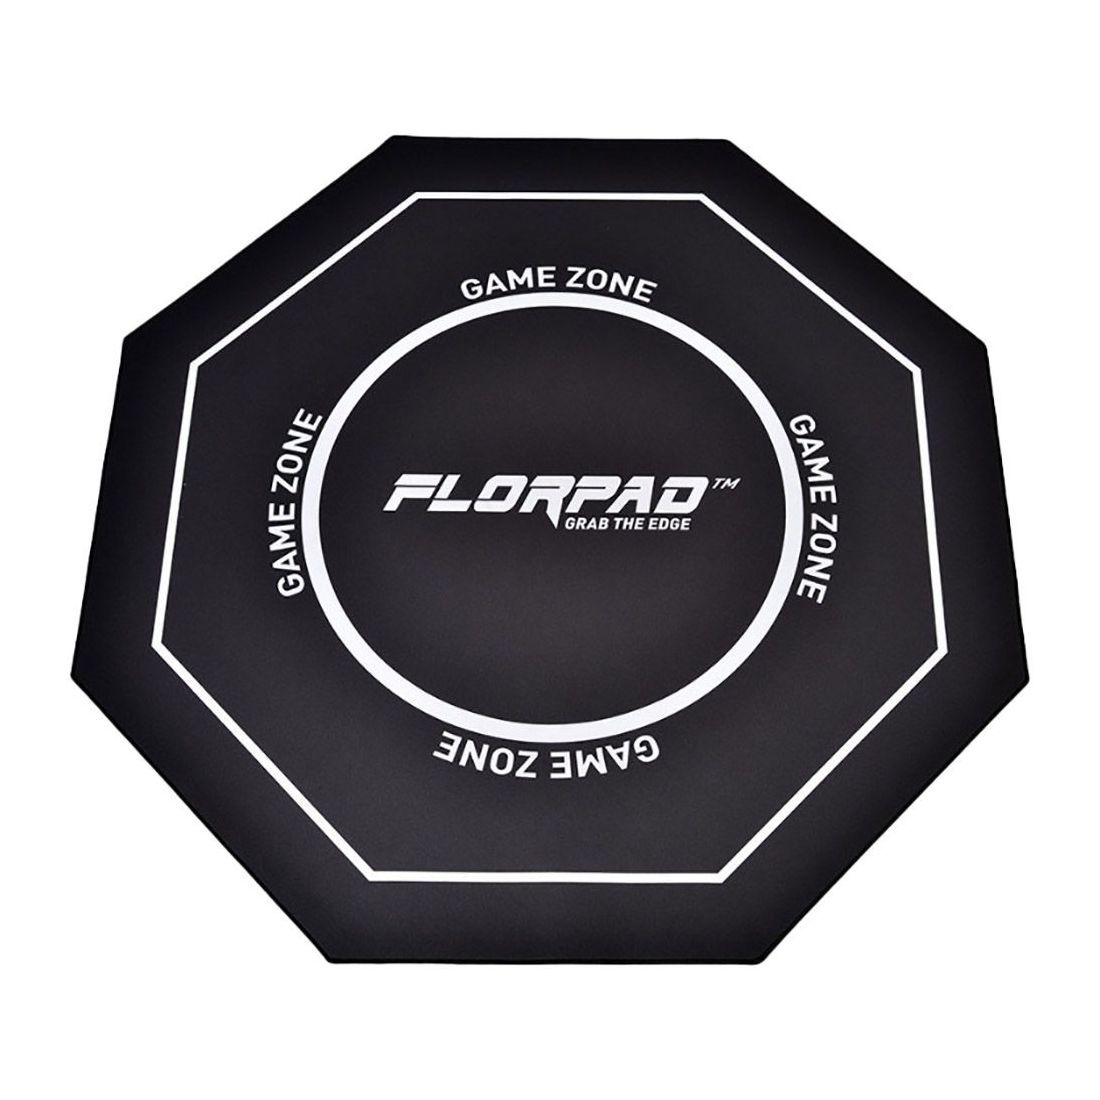 FlorPad Game Zone Gamer E-Sports Floor Protection Mat - Black - Store 974 | ستور ٩٧٤